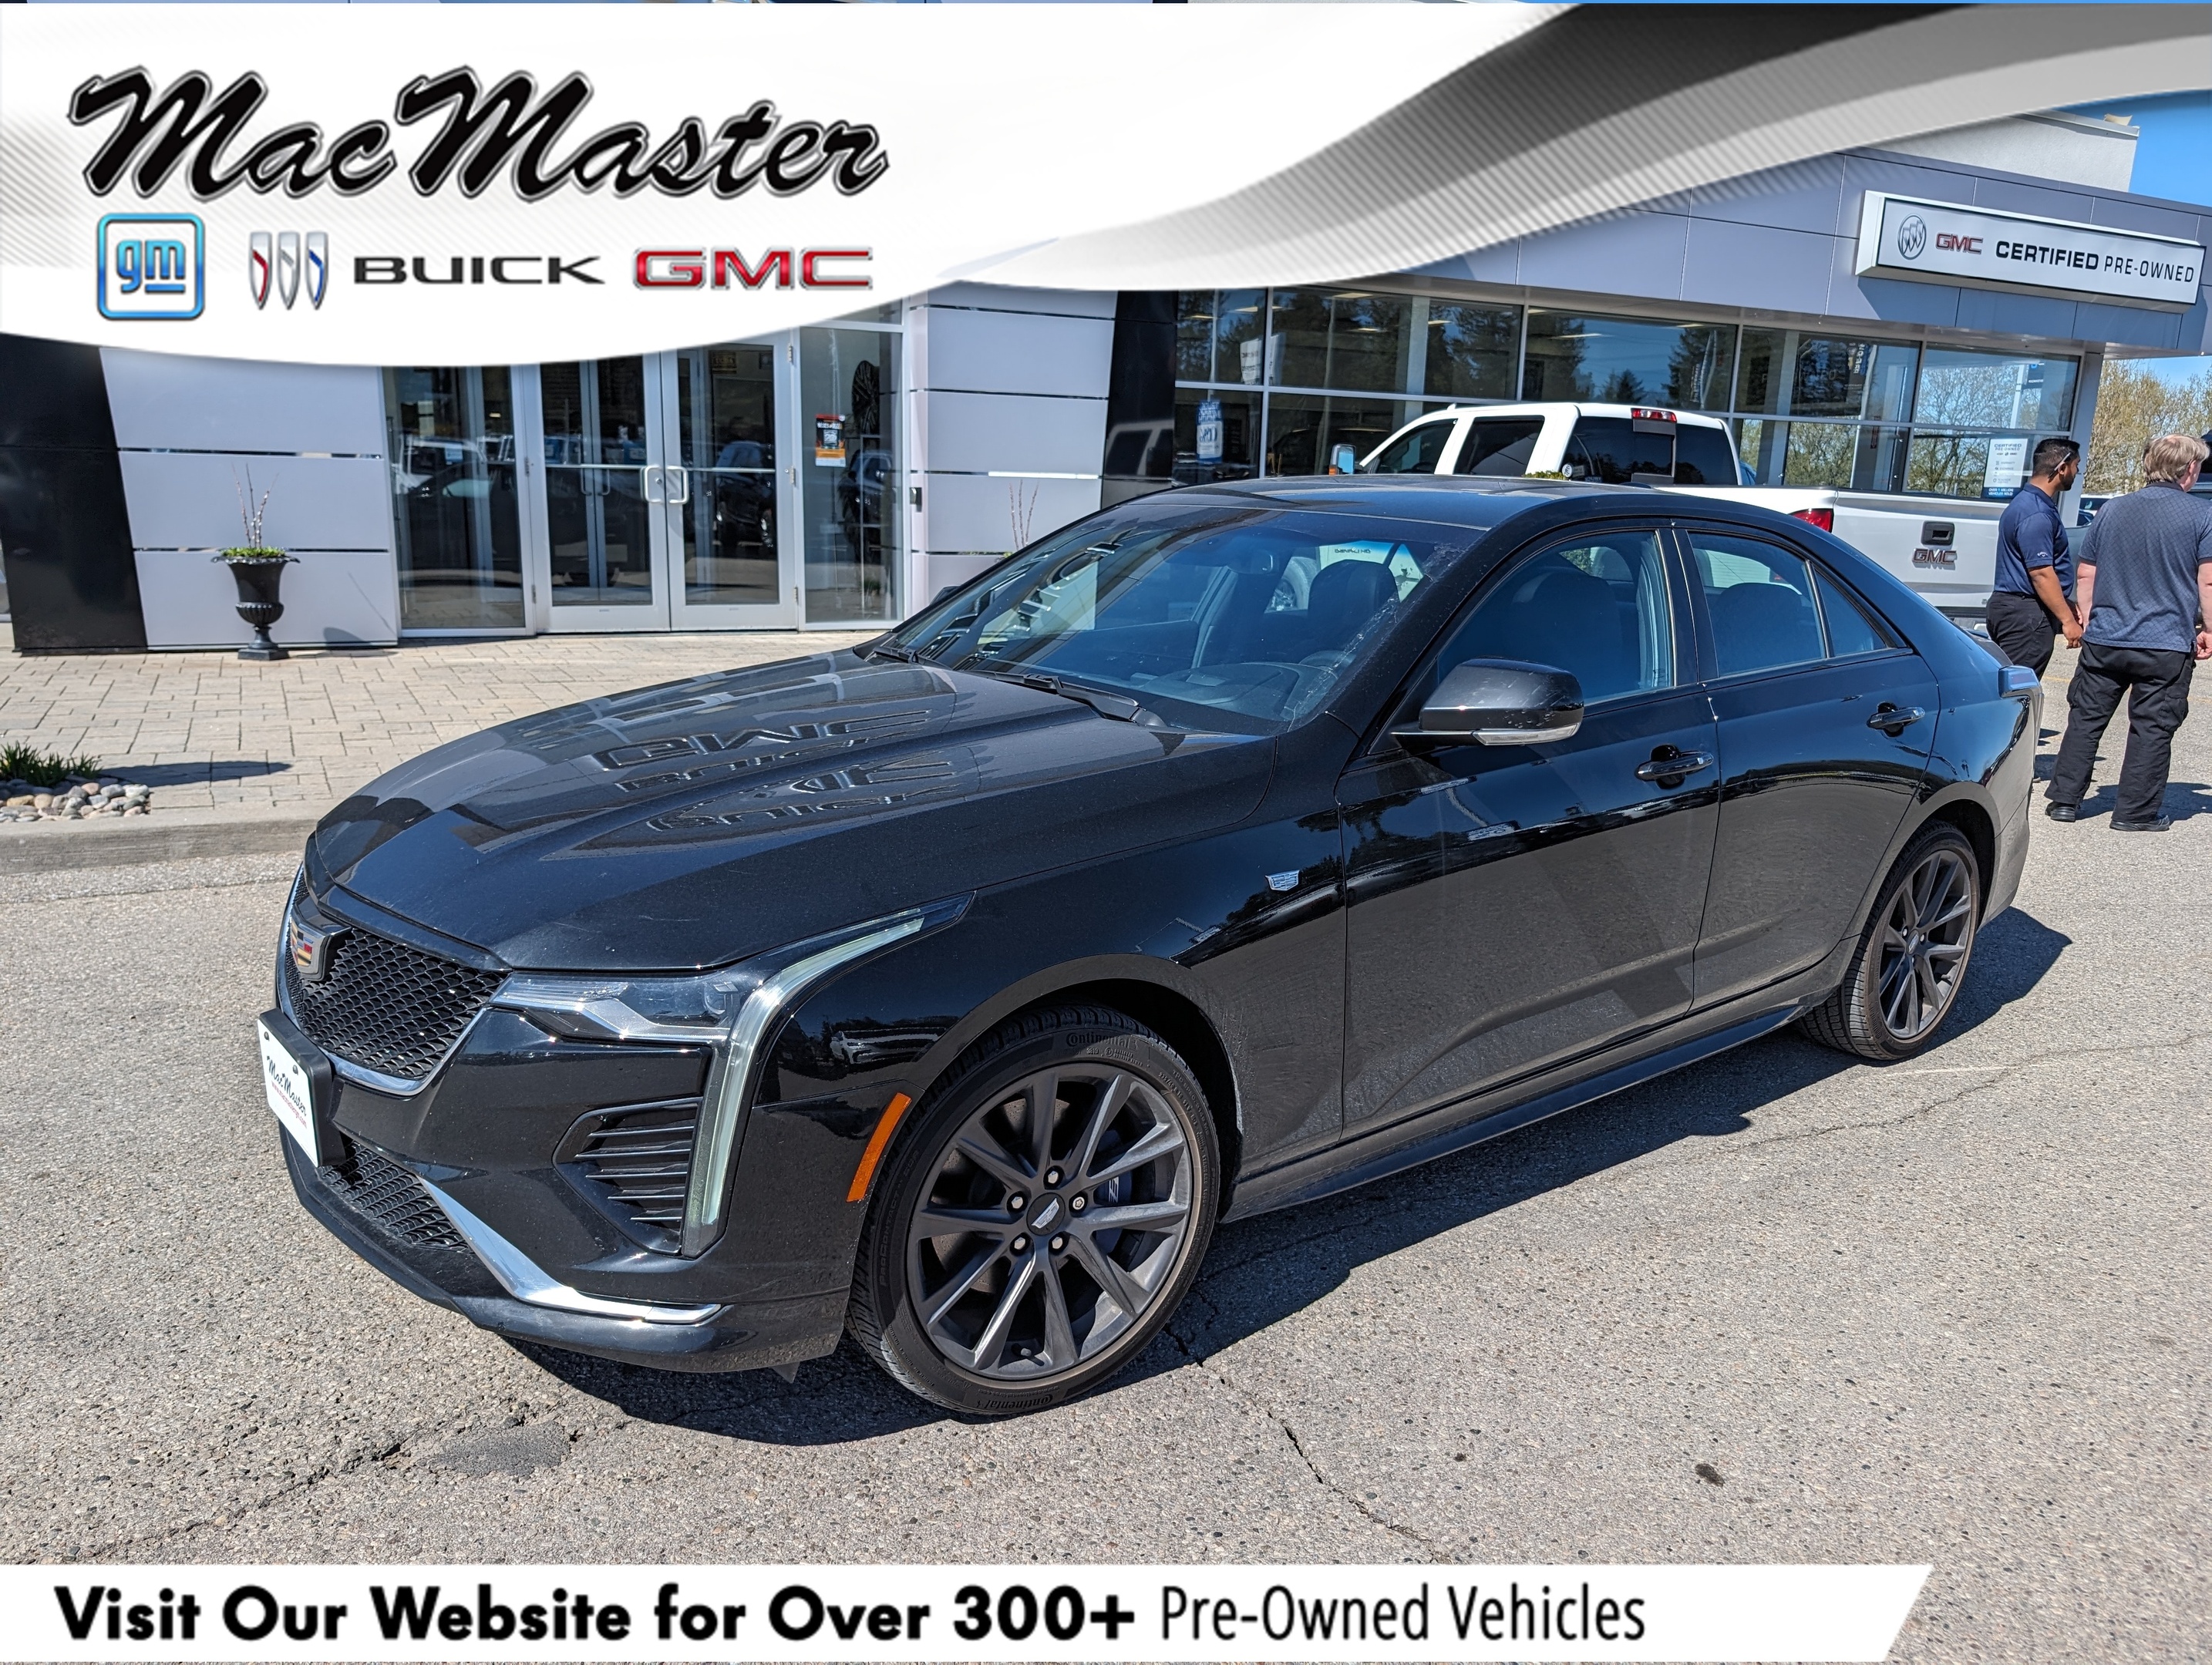 2020 Cadillac CT4 SPORT, 2.0T, AWD, NAV, ROOF, HTD LEATHER, GOOD KMS